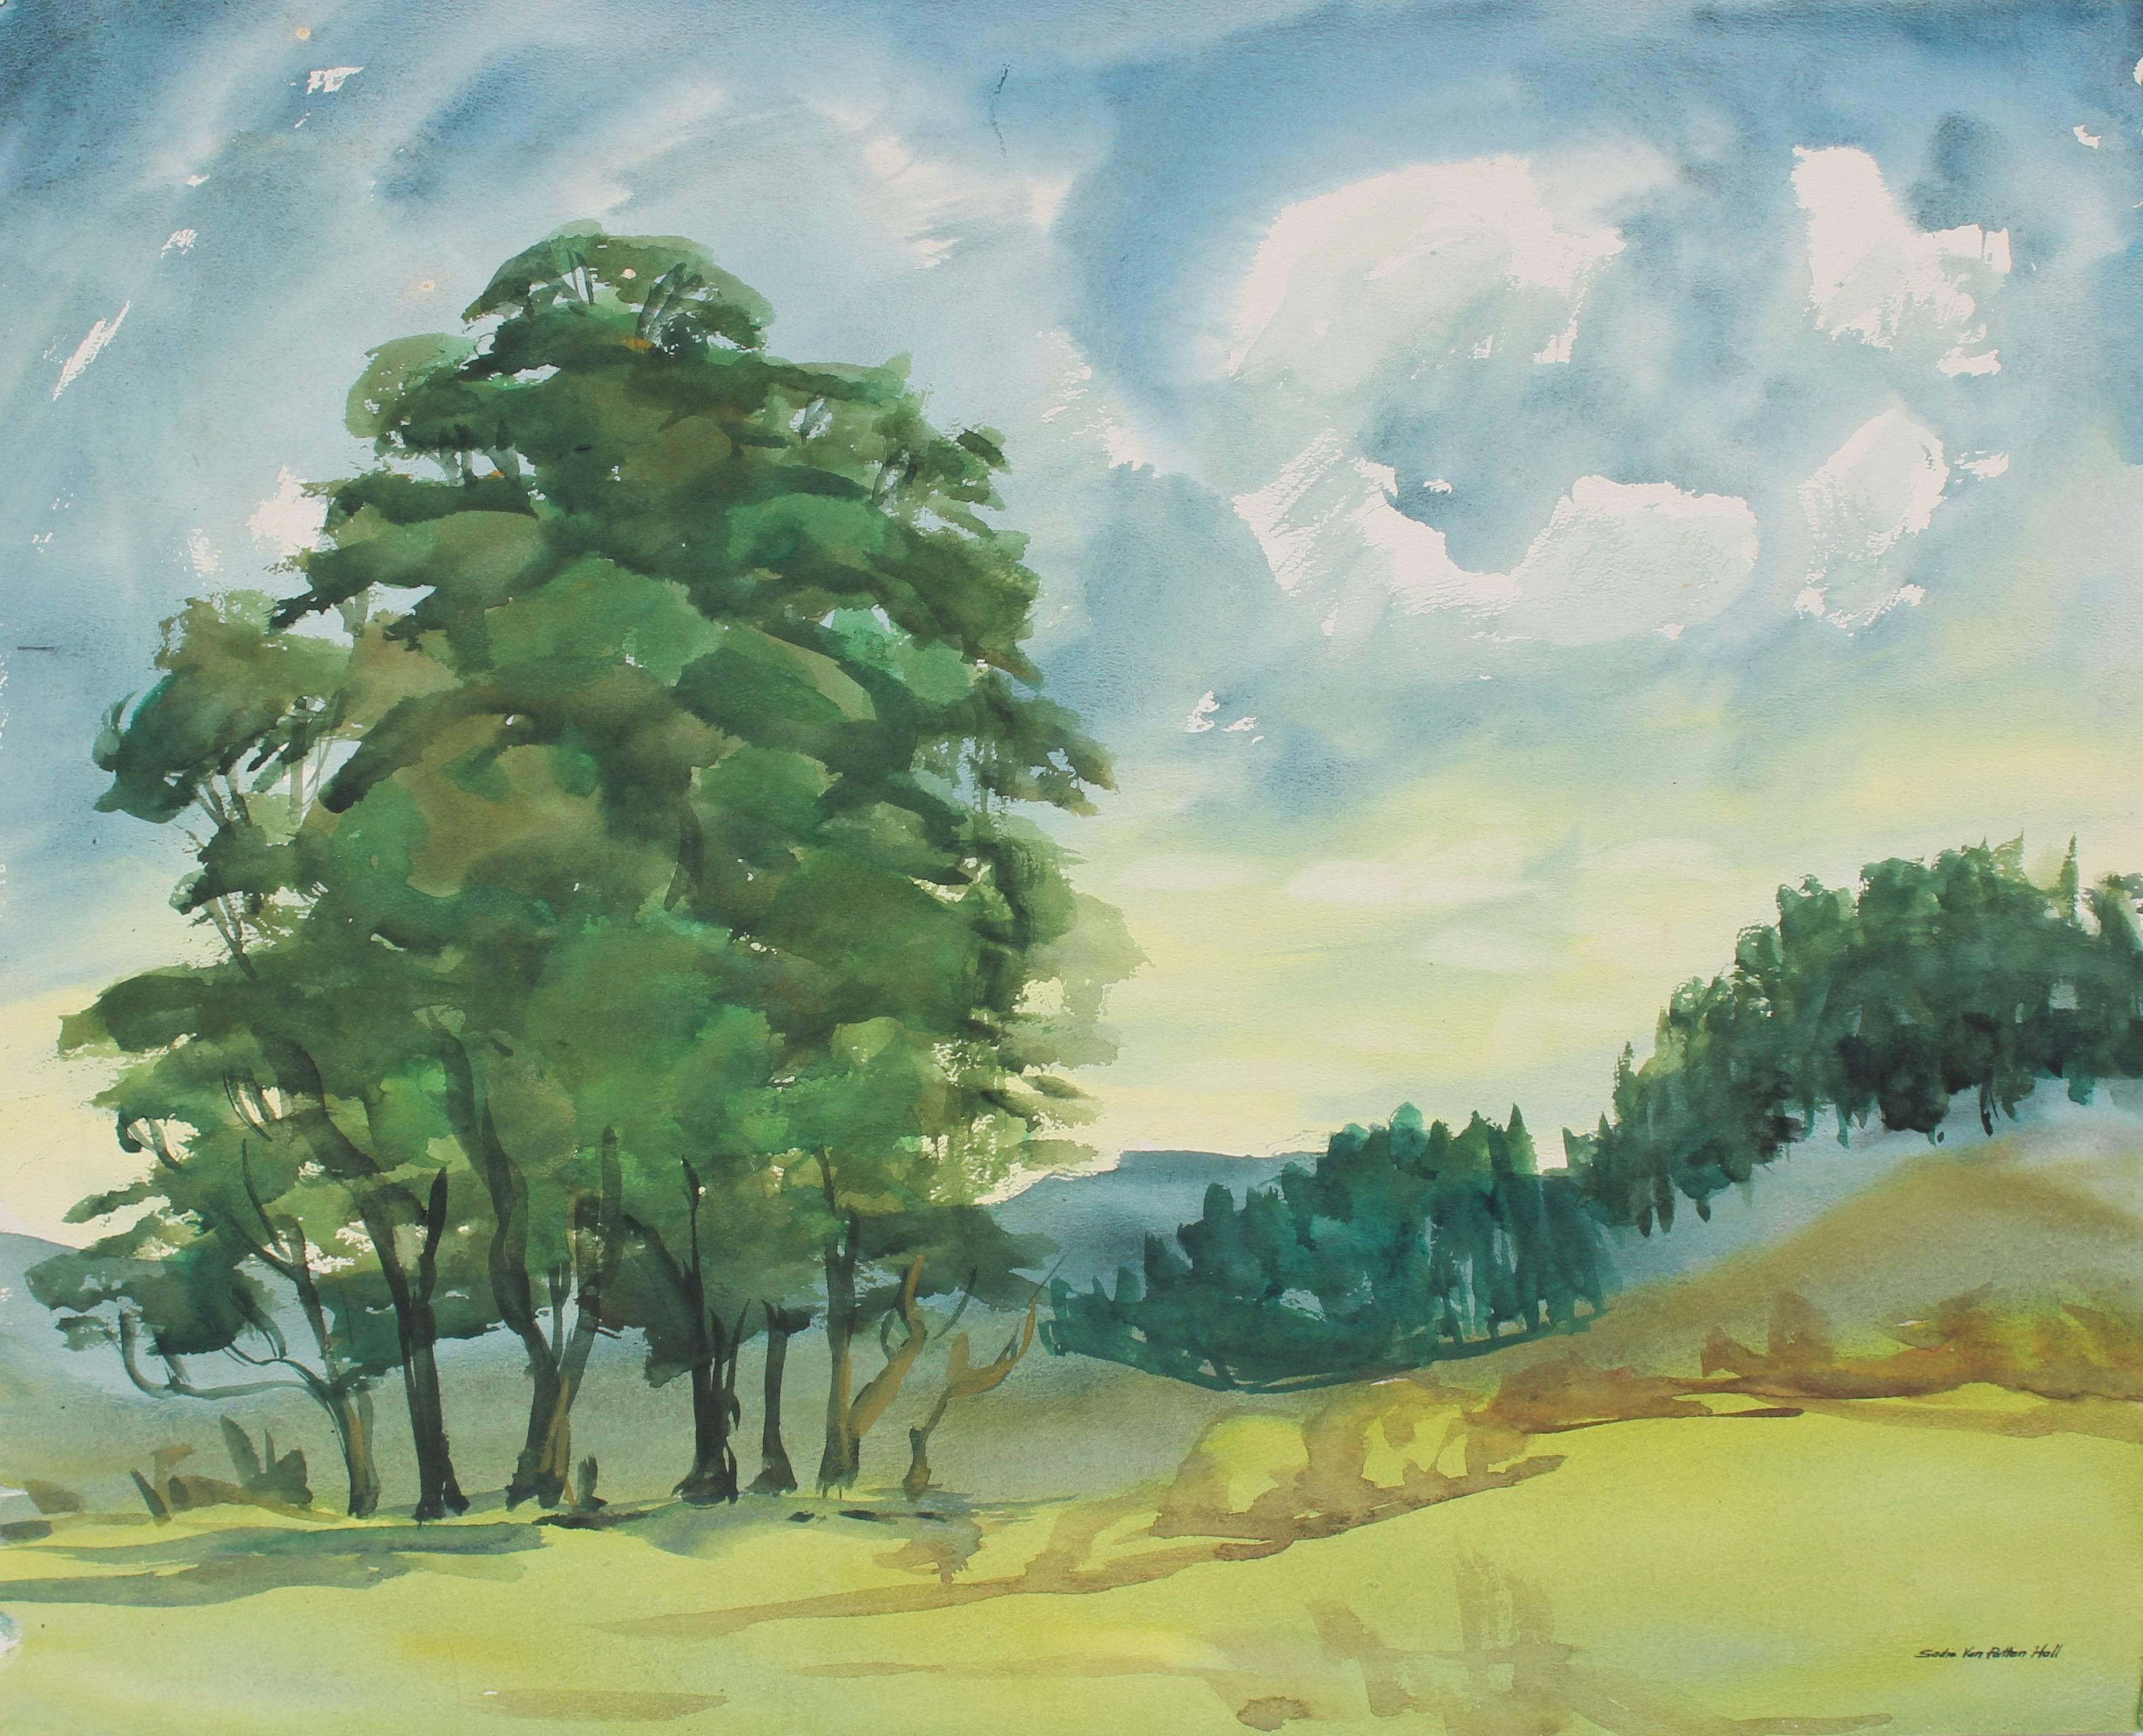 Sadie Van Patten Hall Landscape Art - California Landscape with Trees, Mid 20th Century Watercolor Painting